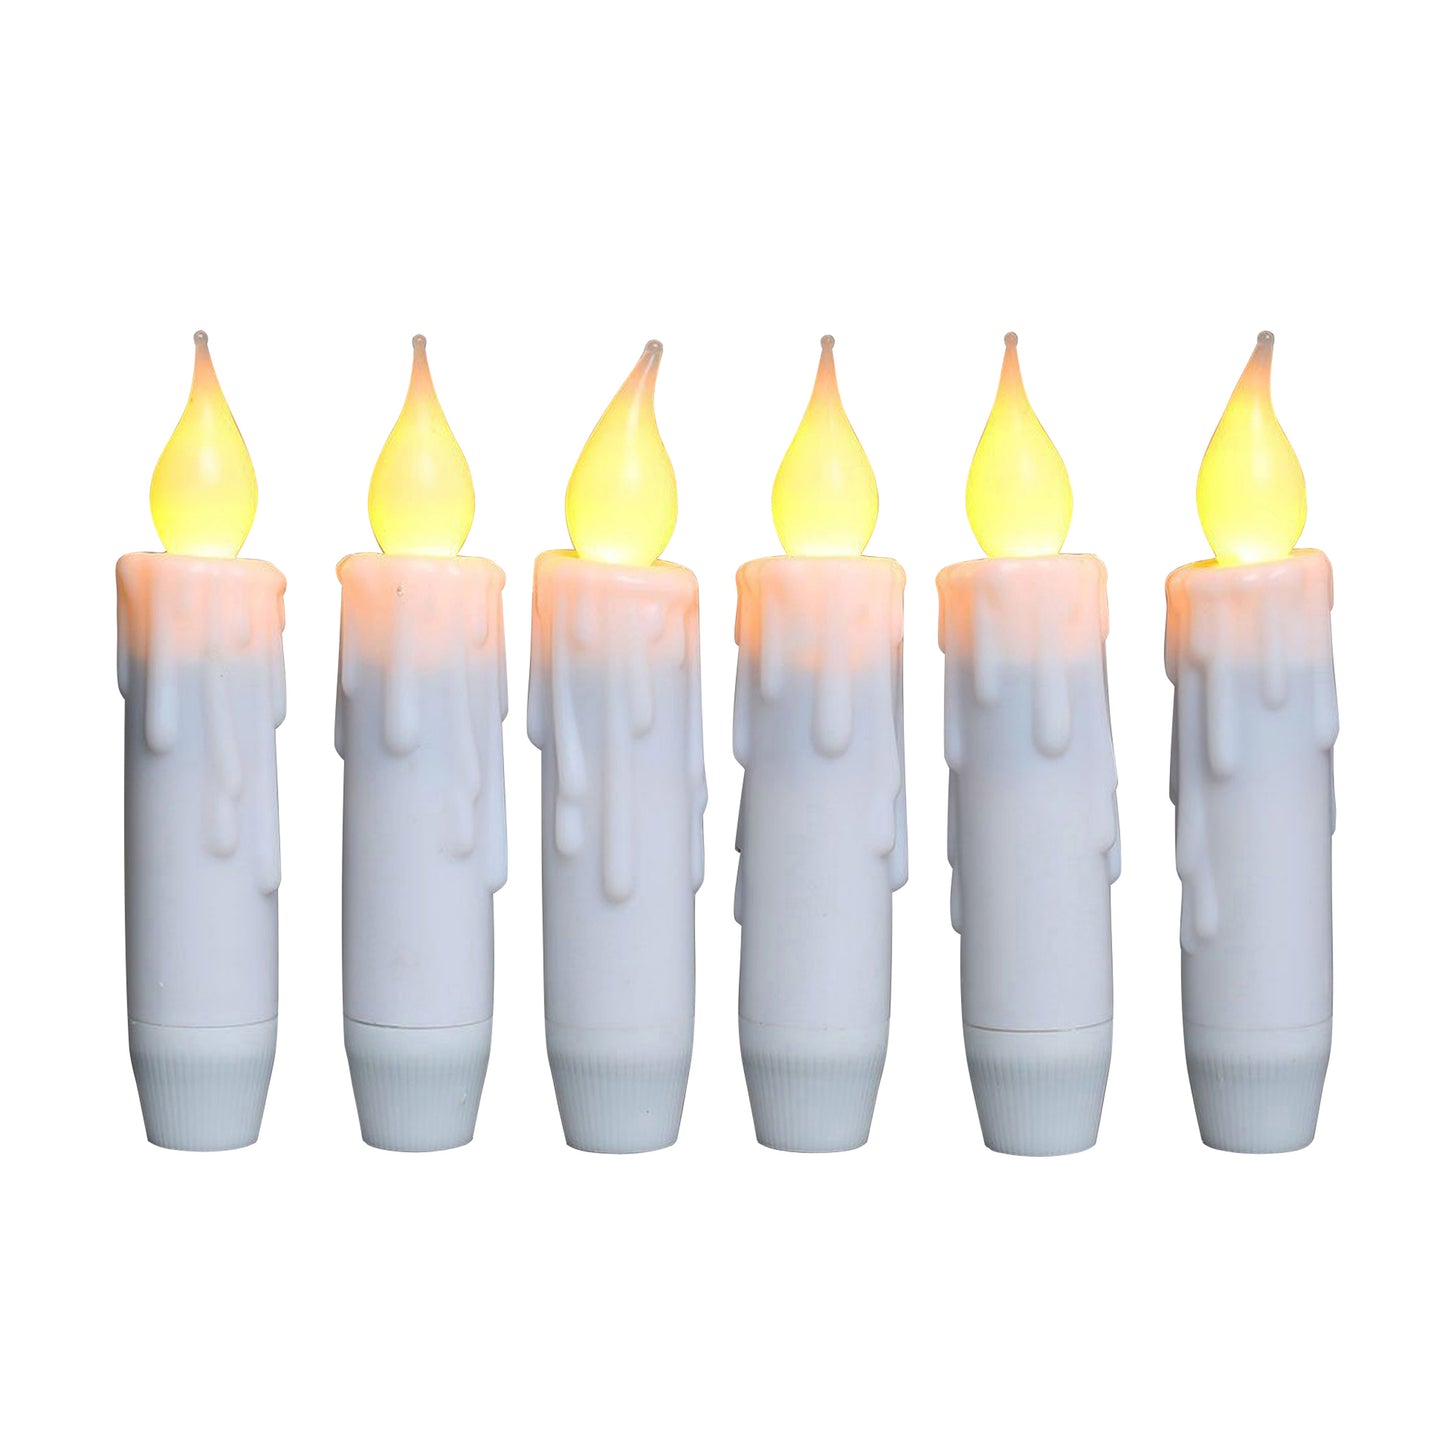 CVHOMEDECO. Set of 6 Flickering Warm White LED Resin Drip 4 Inch Taper Candle with Timer